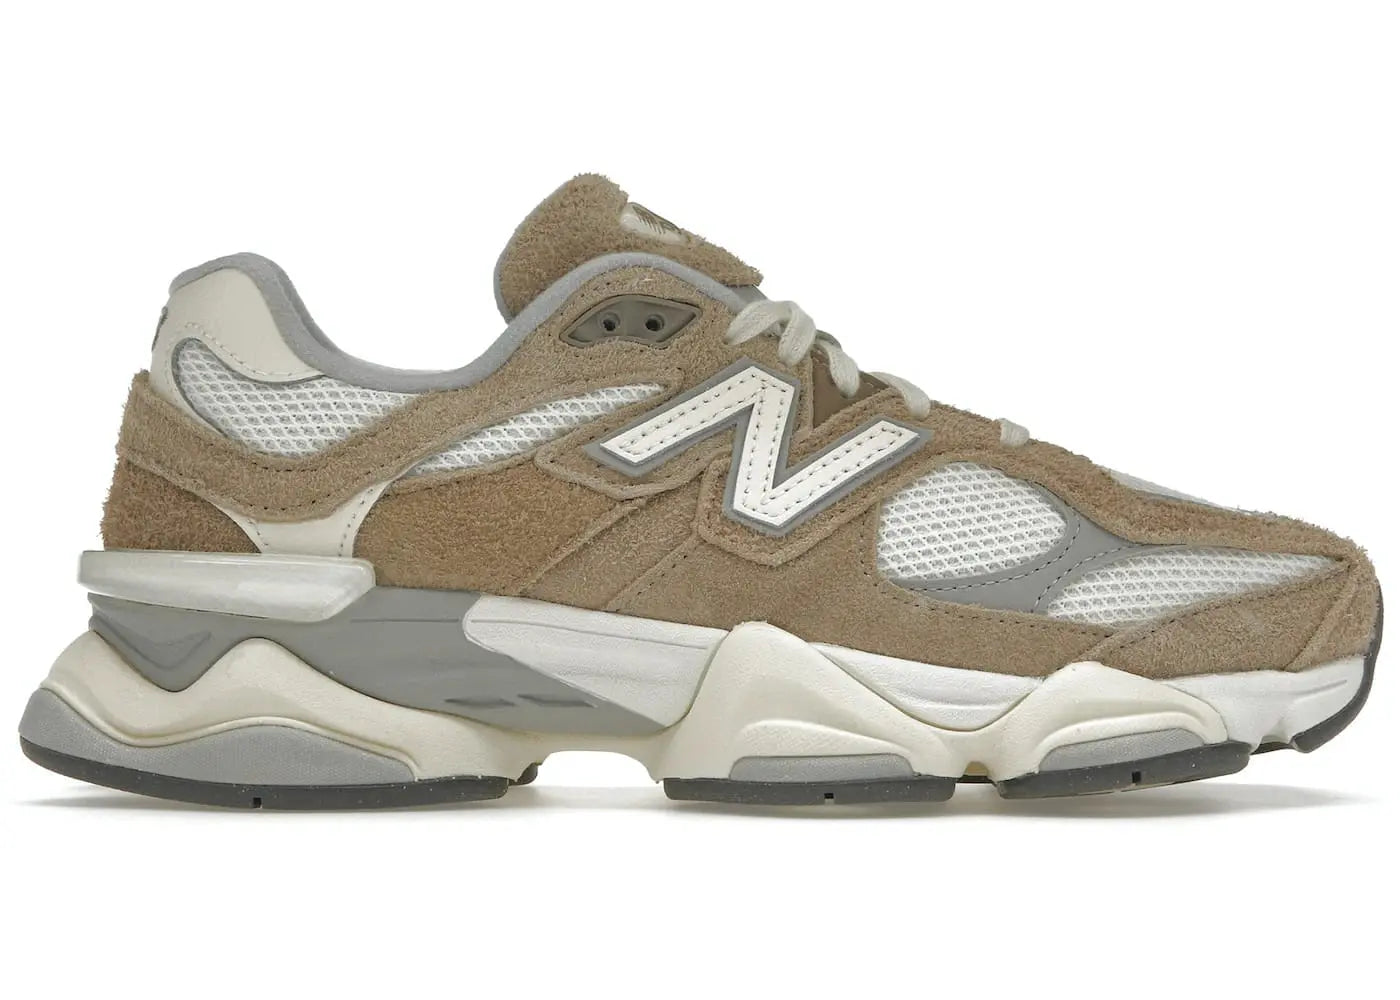 New Balance 9060 Driftwood Stone Pink Sea Salt in Auckland, New Zealand - Shop name